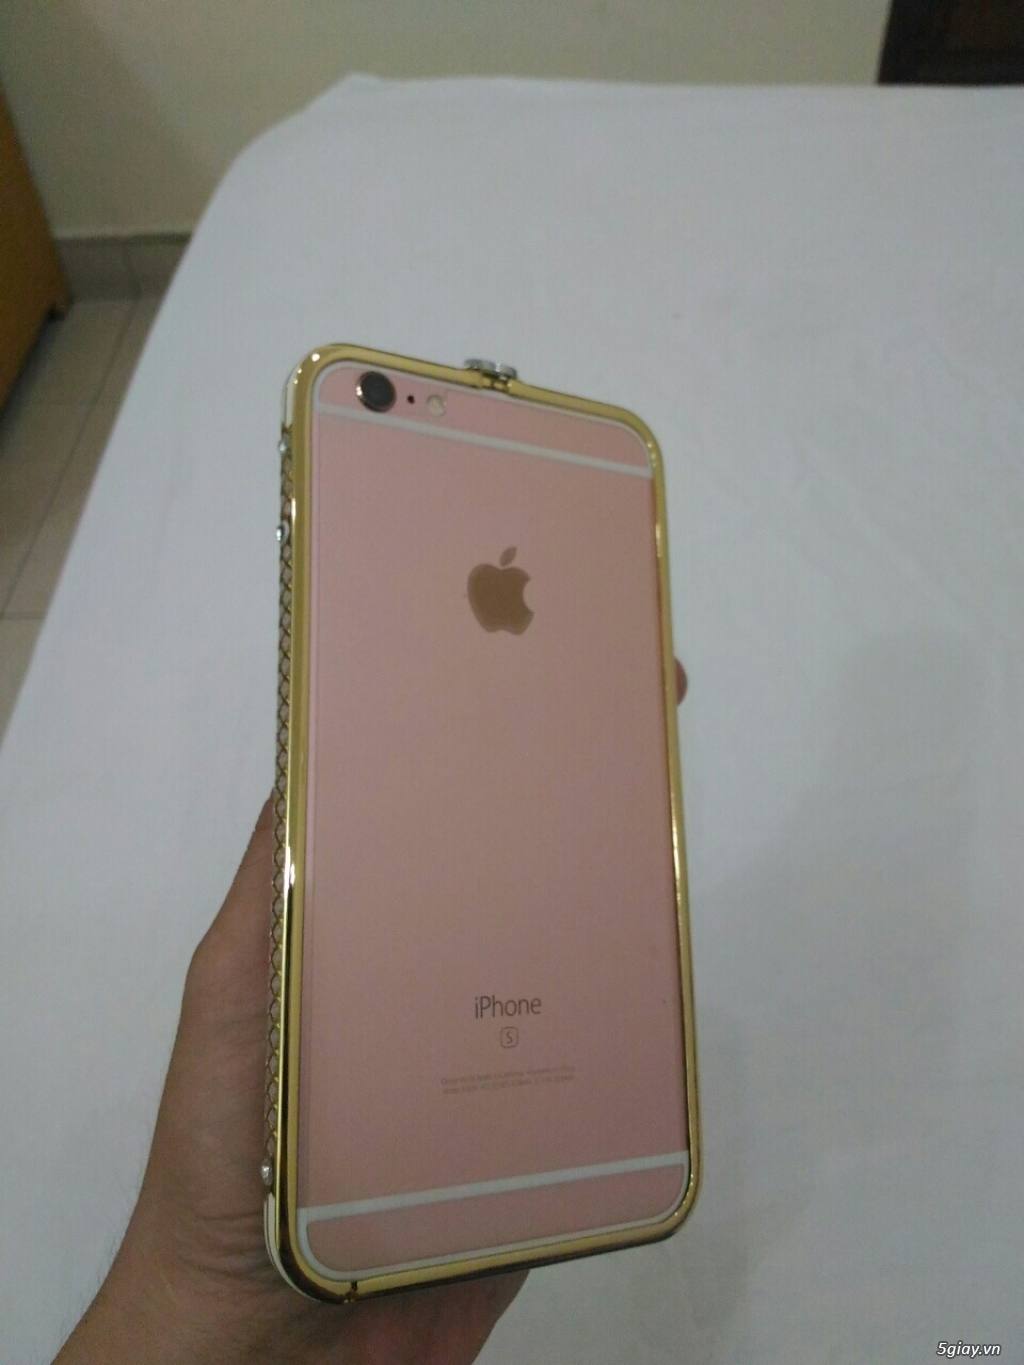 Iphone 6s Plus 128gb rosa gold like new - 1